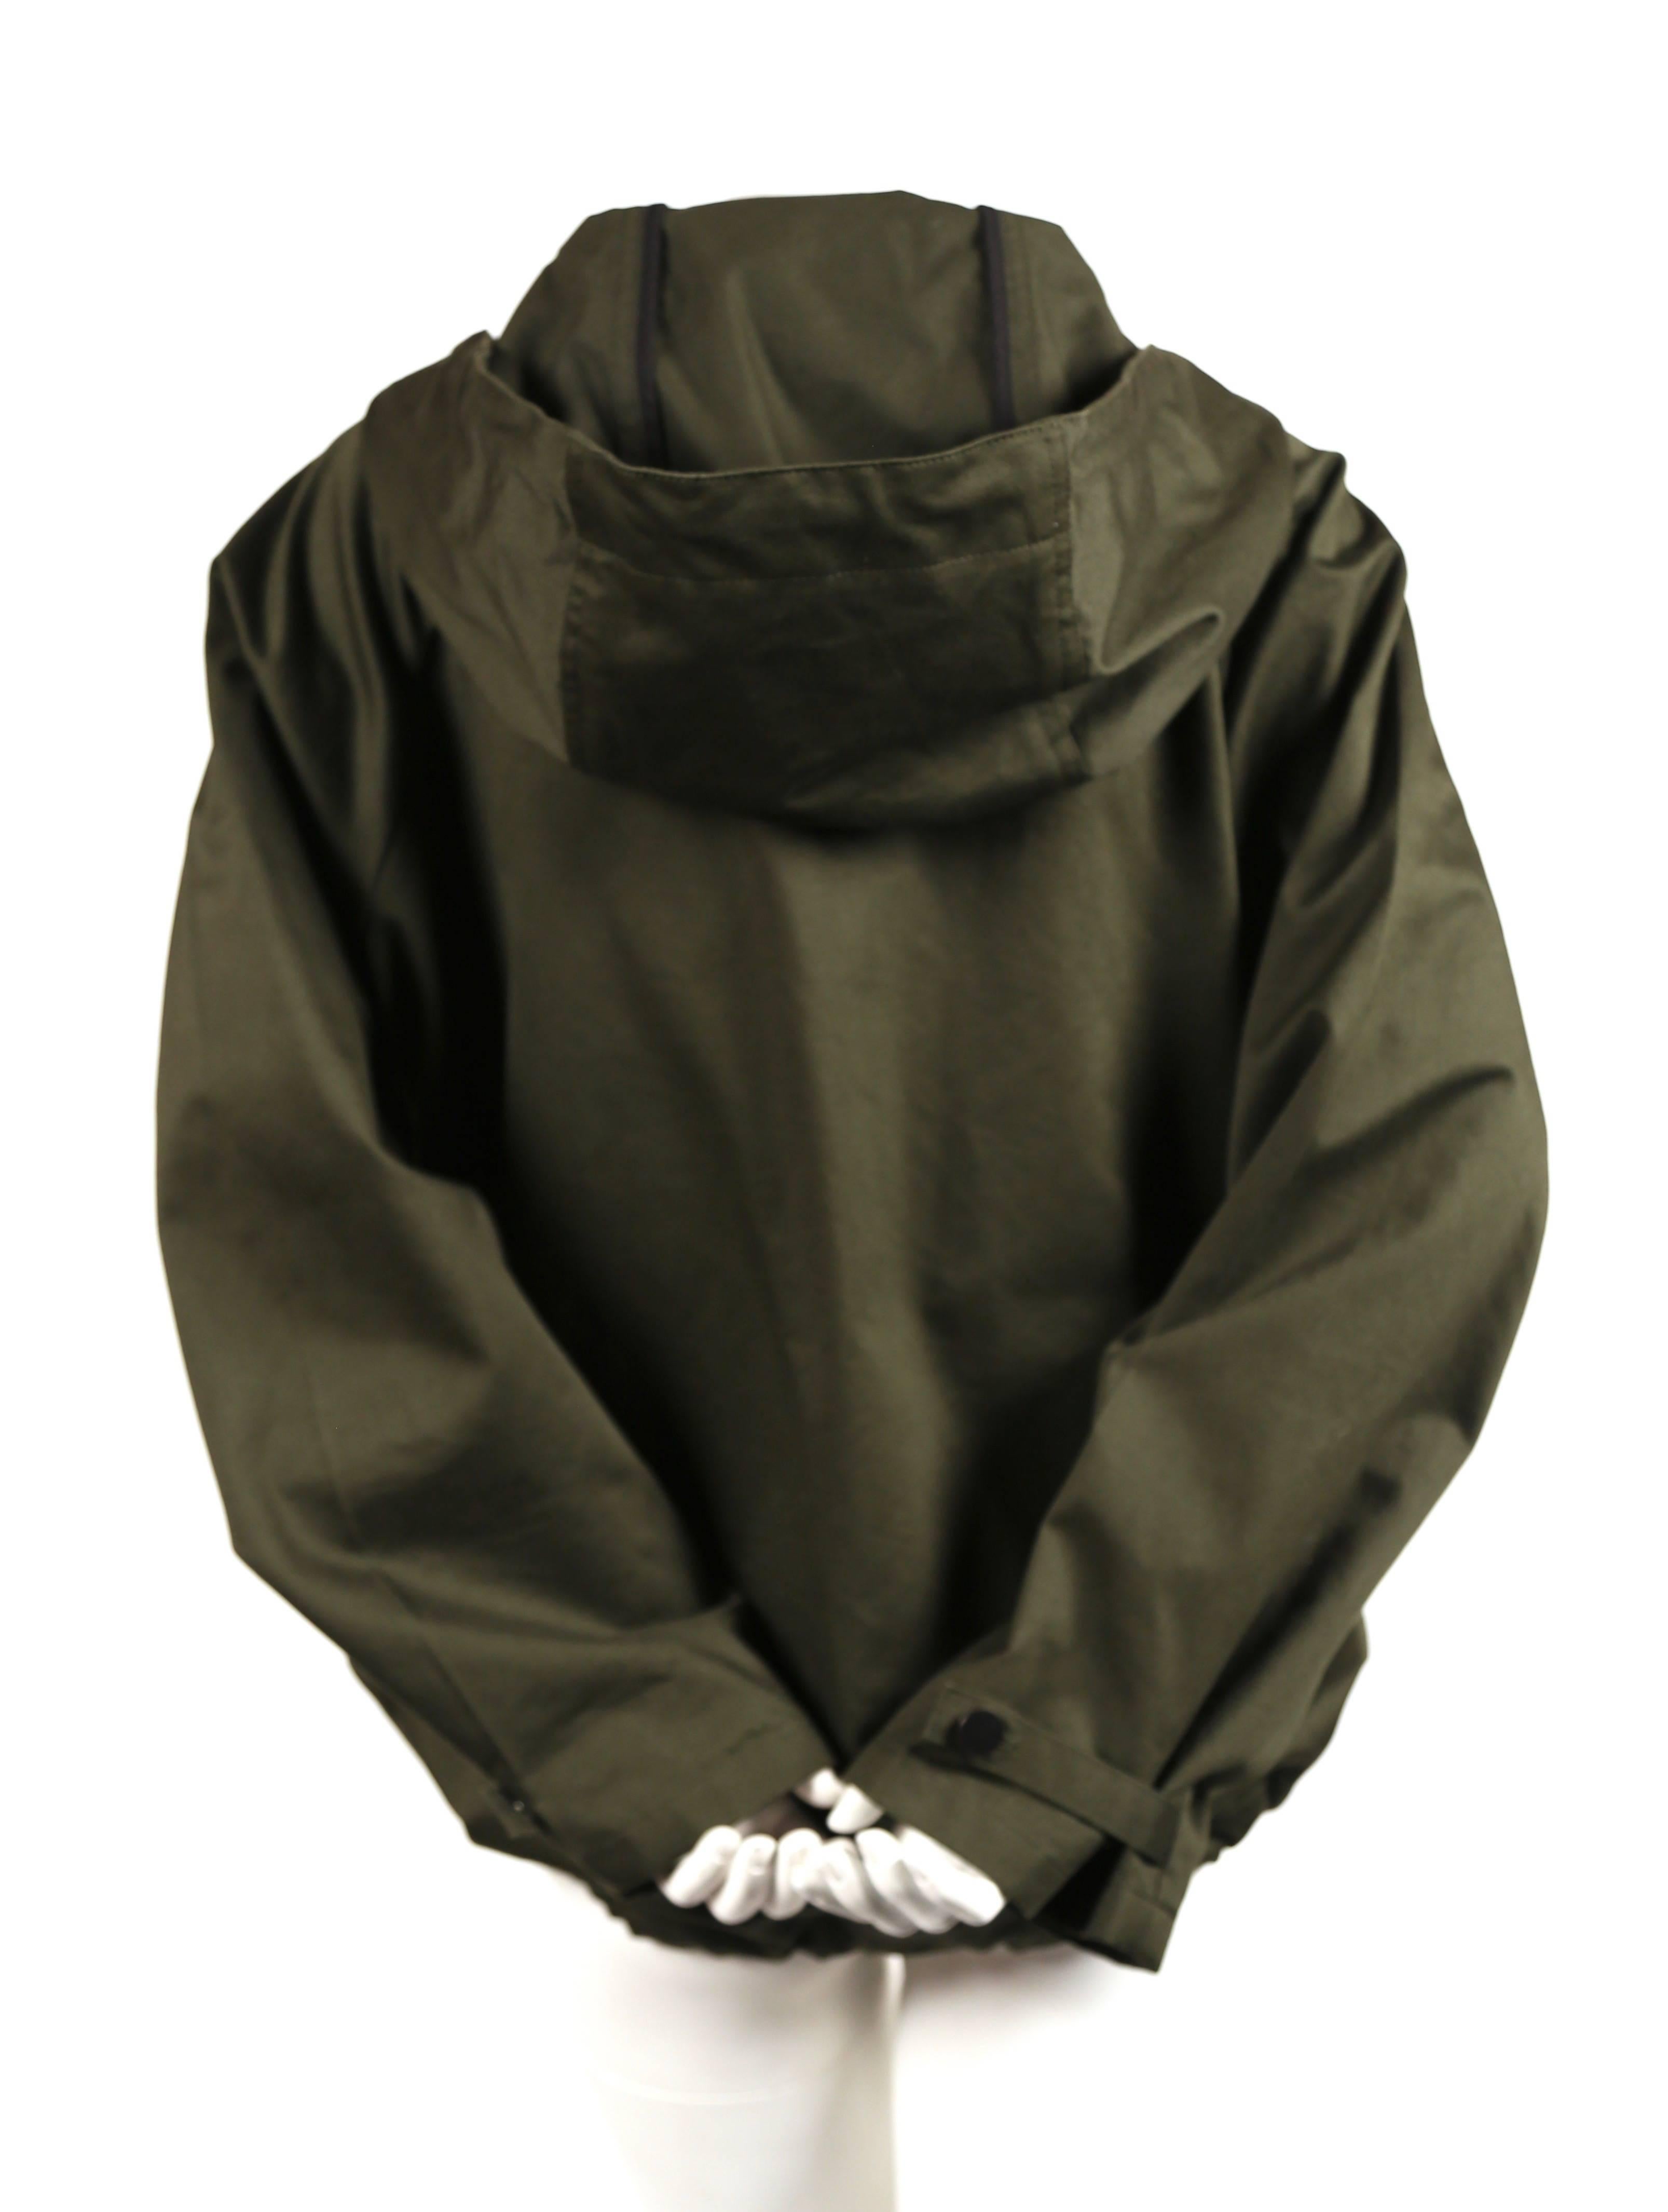 Celine By Phoebe Philo army green anorak jacket in polished cotton For Sale 1